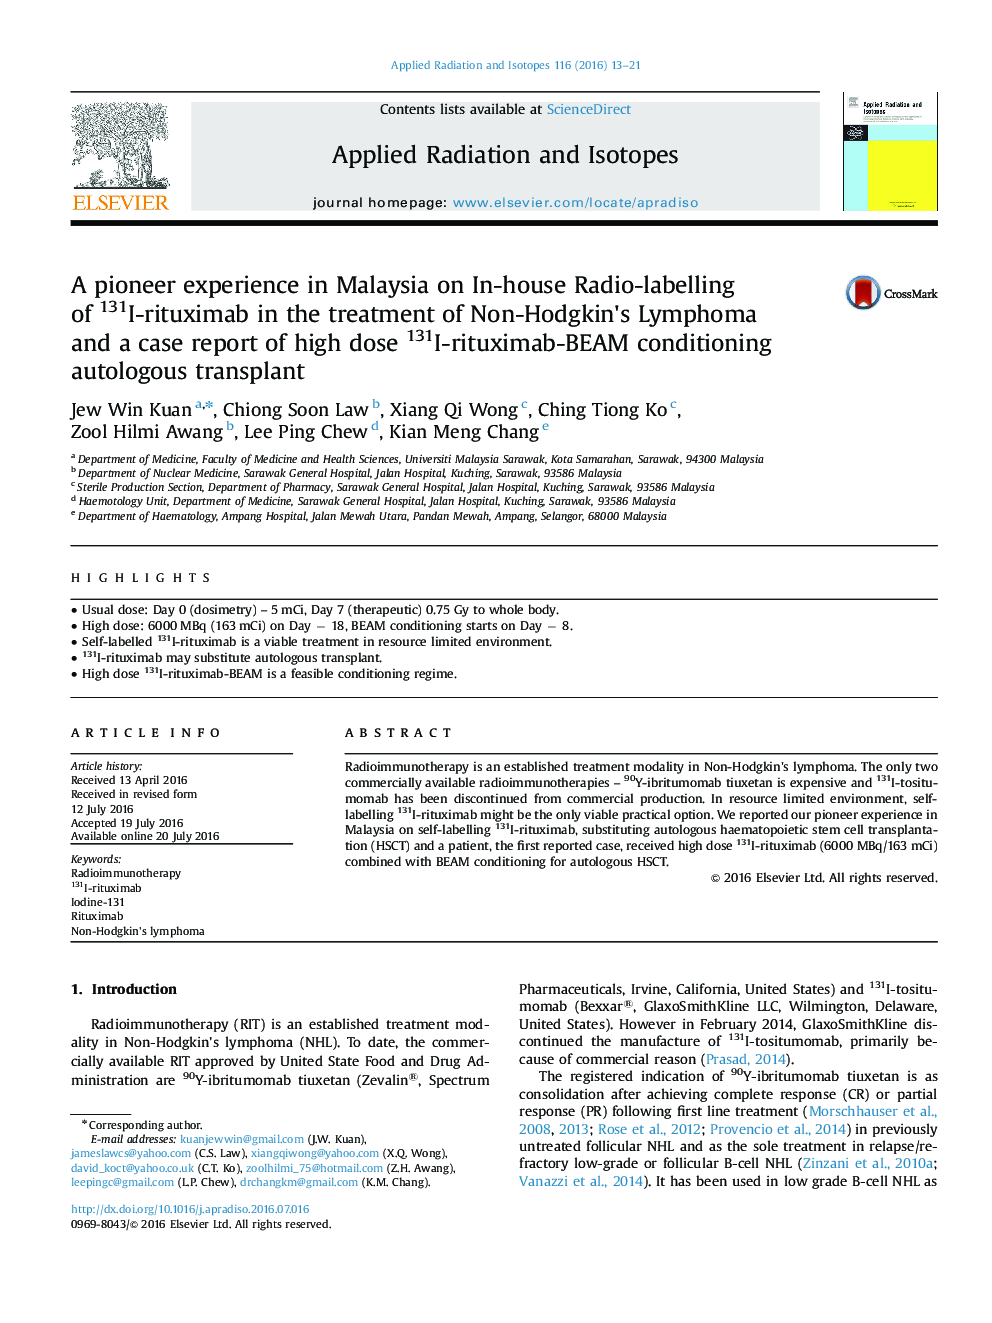 A pioneer experience in Malaysia on In-house Radio-labelling of 131I-rituximab in the treatment of Non-Hodgkin's Lymphoma and a case report of high dose 131I-rituximab-BEAM conditioning autologous transplant